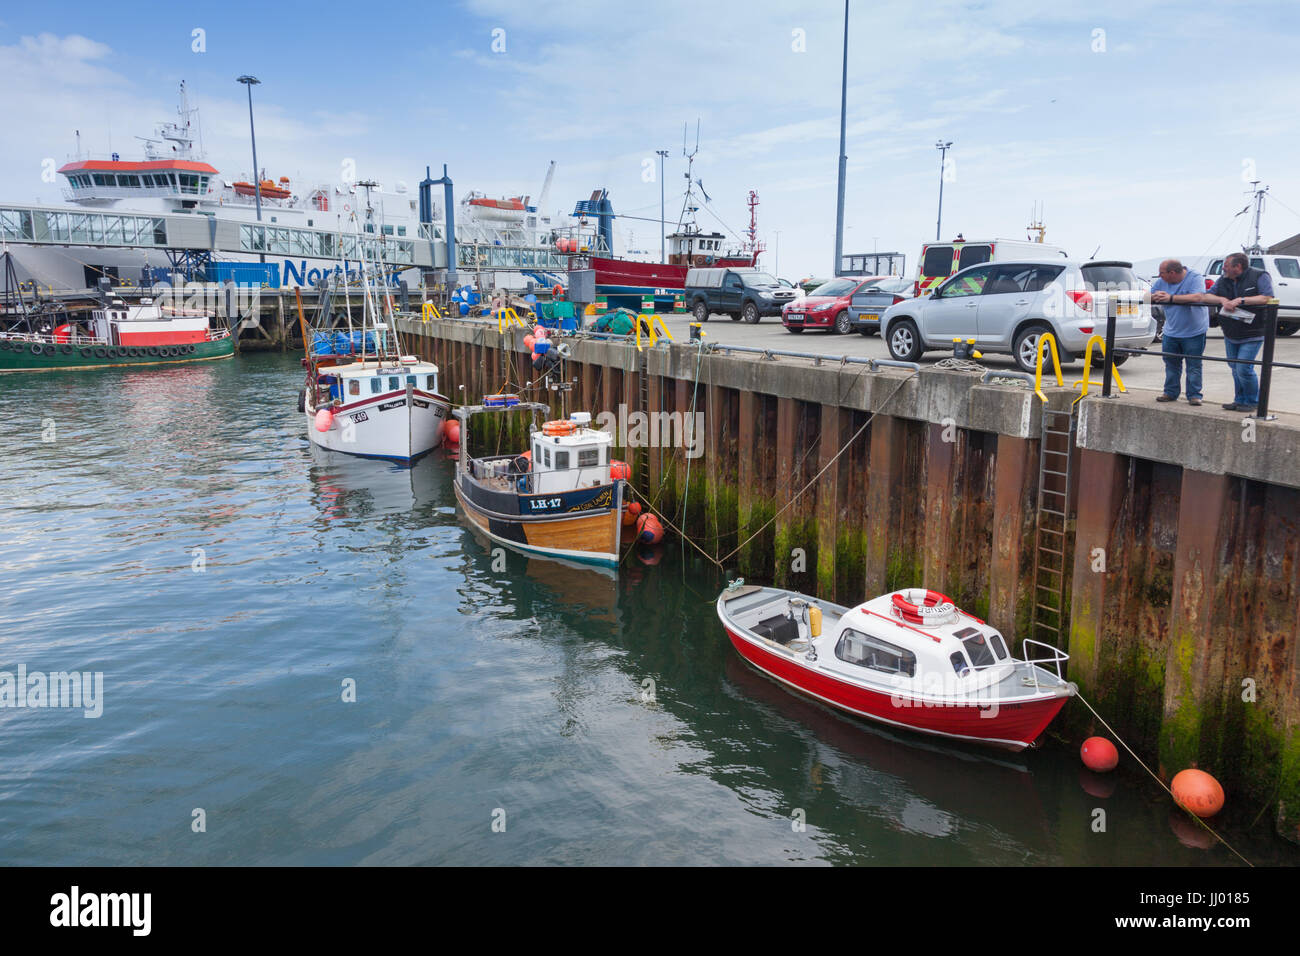 View of the harbour, Stromness, Orkney Scotland UK Stock Photo